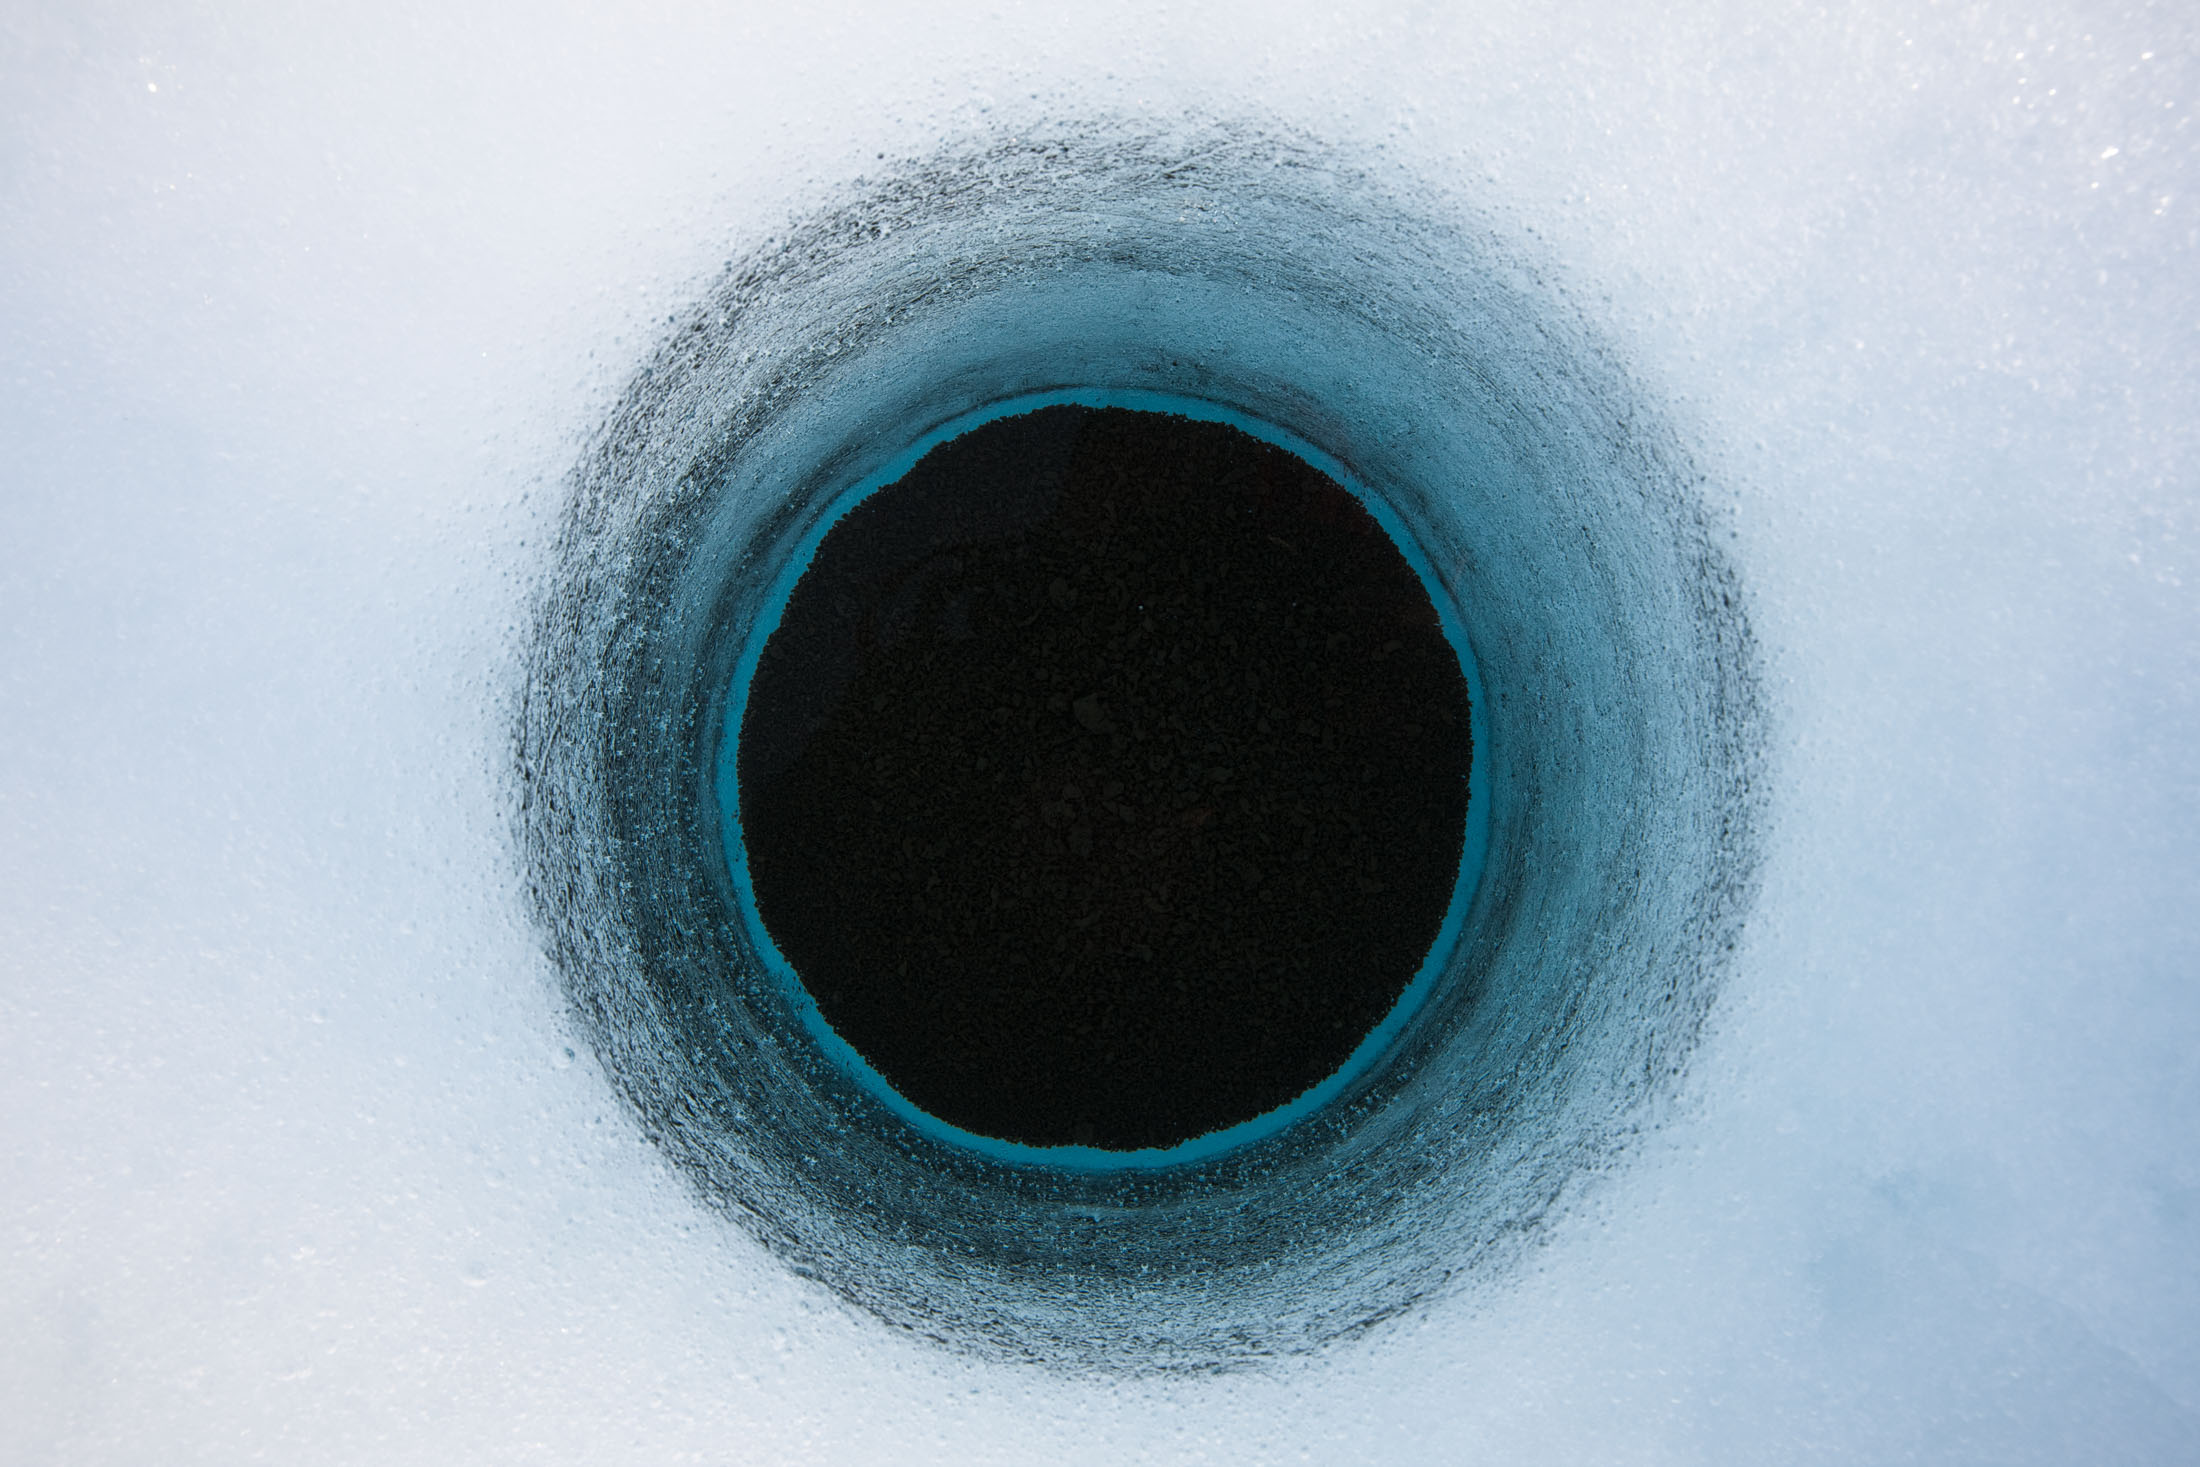 A hole made of cryoconite on the surface of the Greenland ice sheet